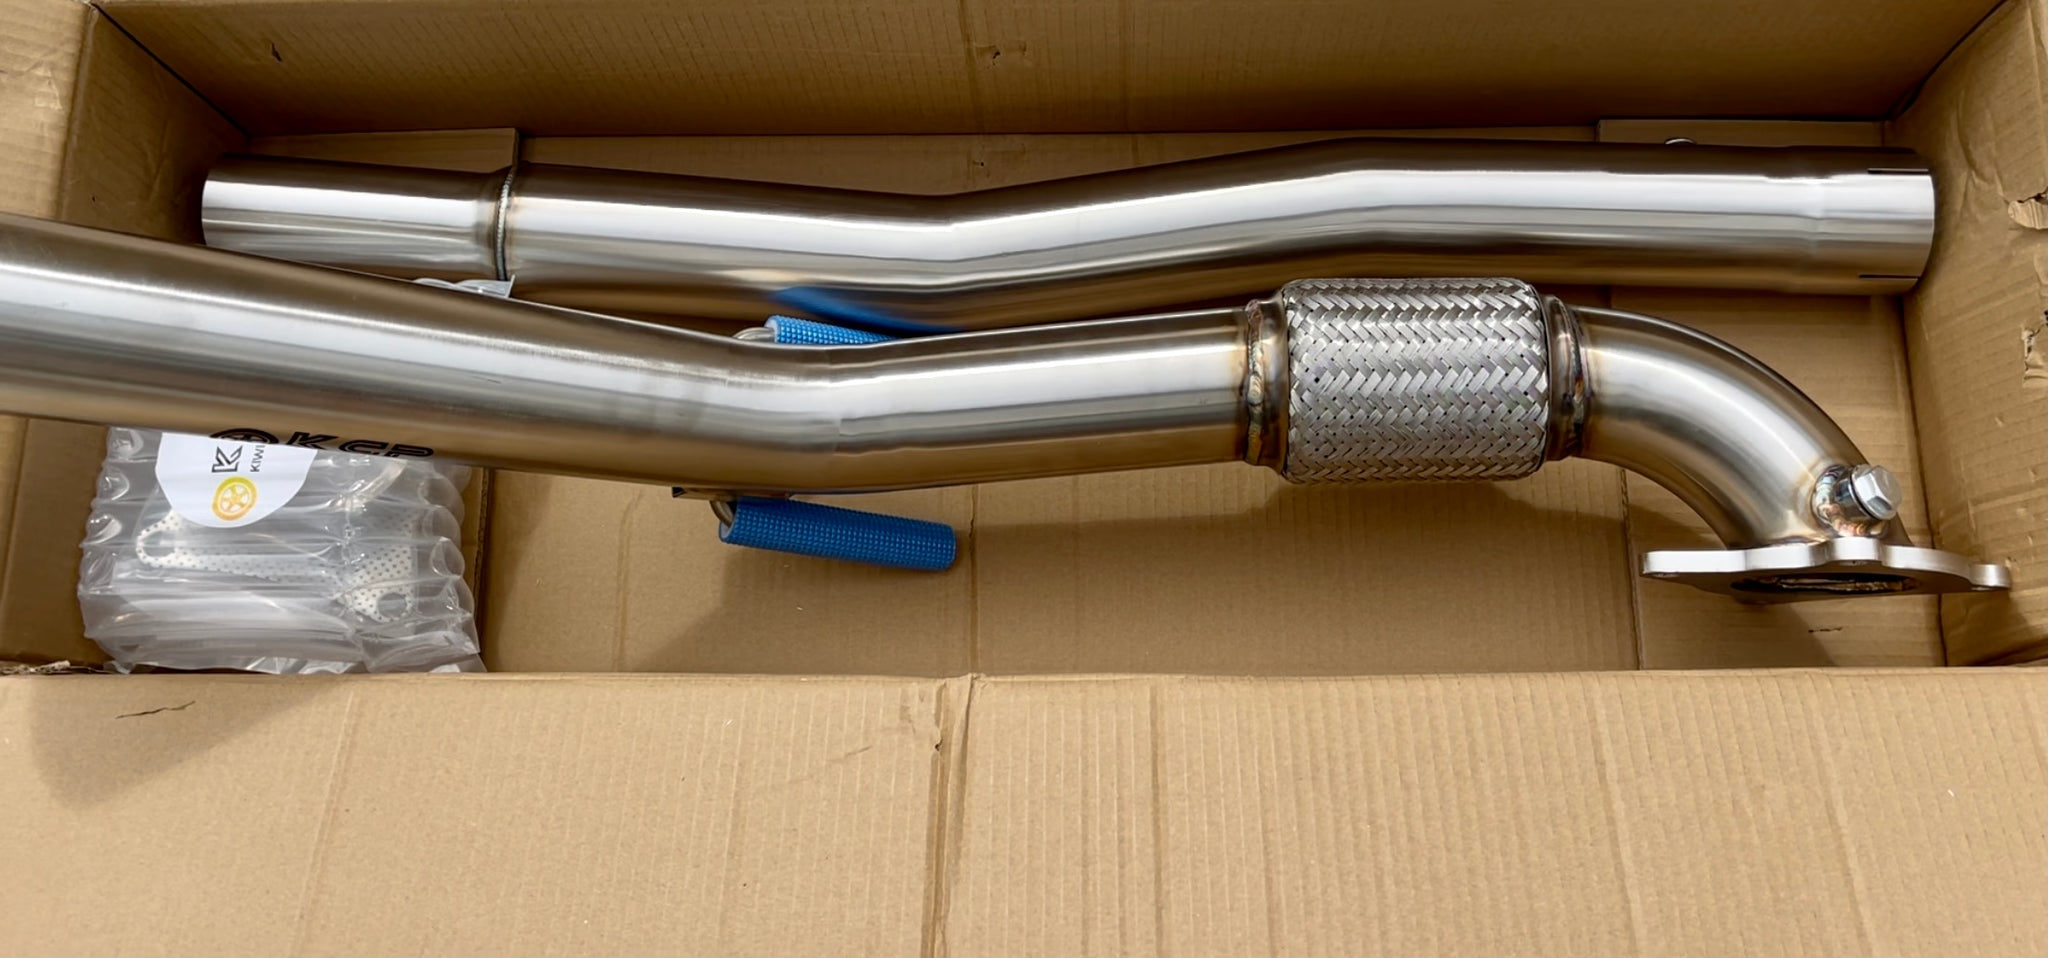 KCP Stainless Decat Downpipe Suit For VW Golf MK5 MK6 GTI Audi A3 8P 2.0T 1.8T Exhaust